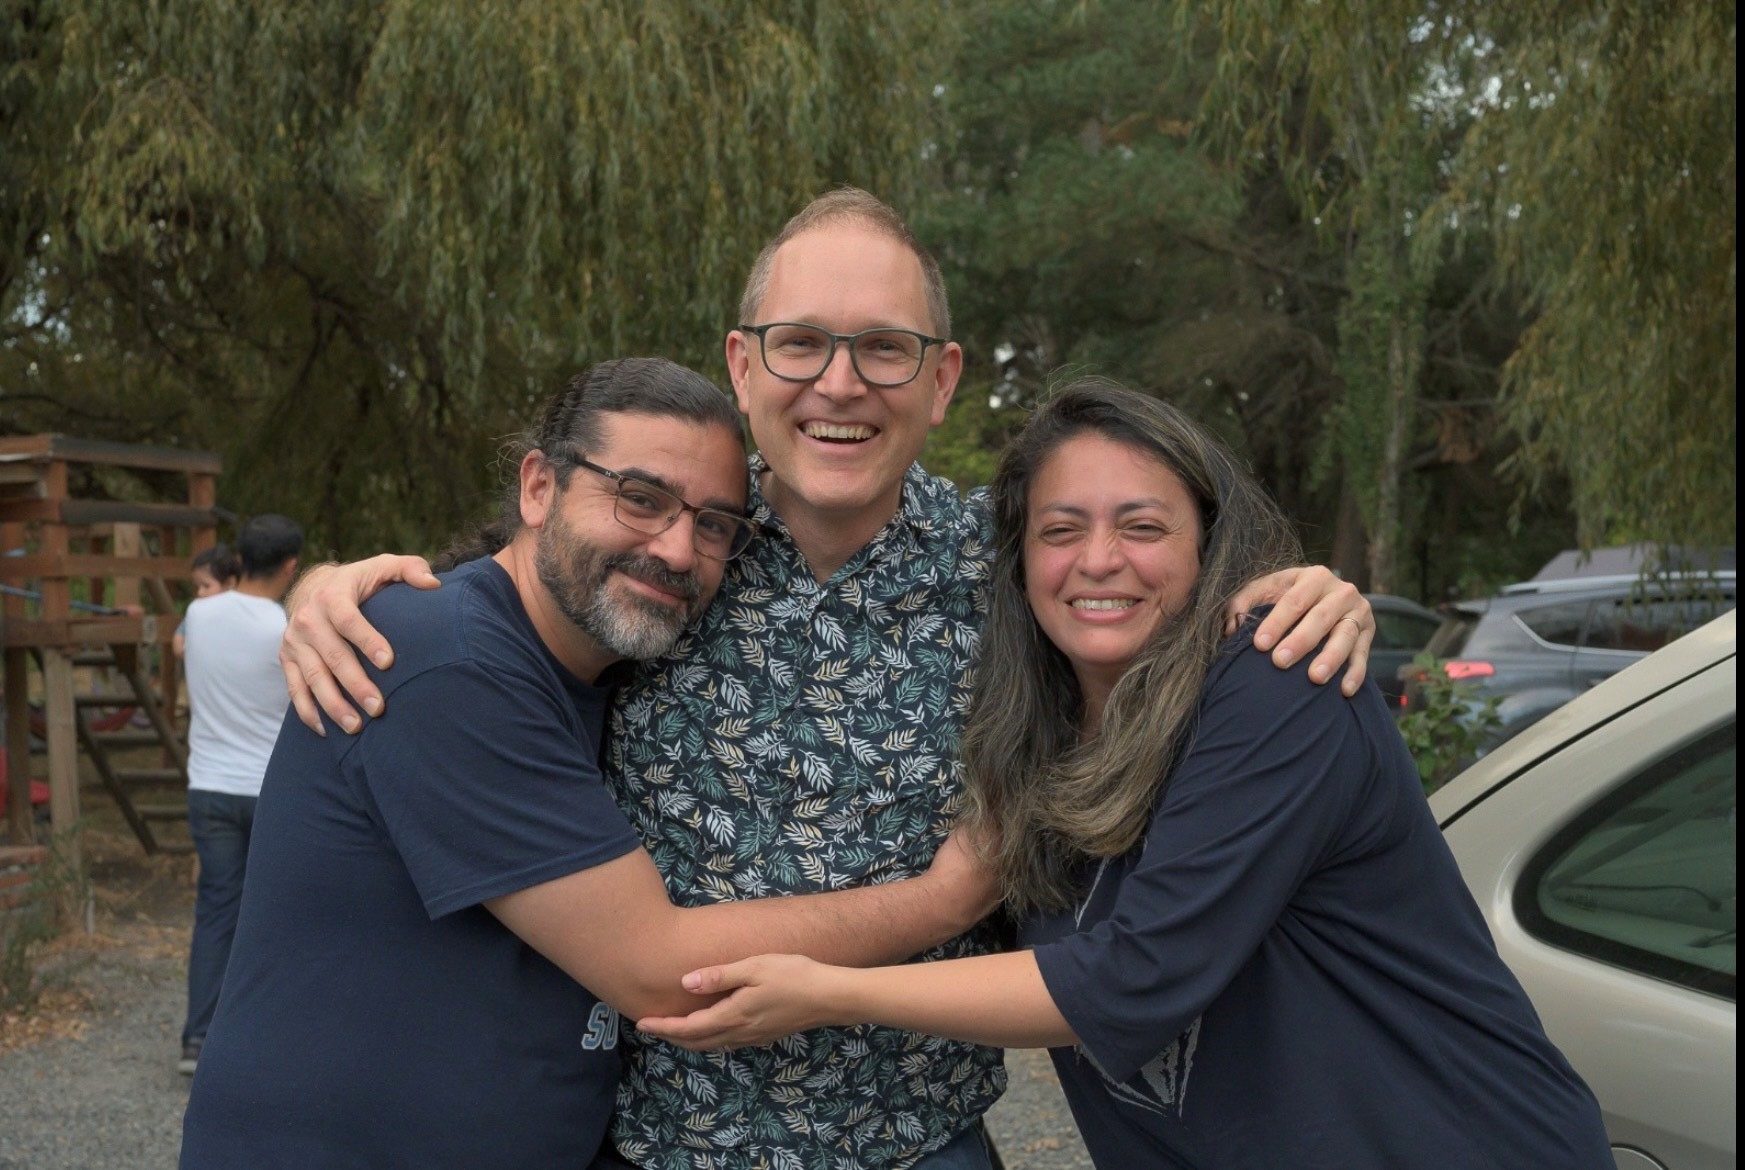 Matt with Jenn Pinares and her husband who have started a new church.